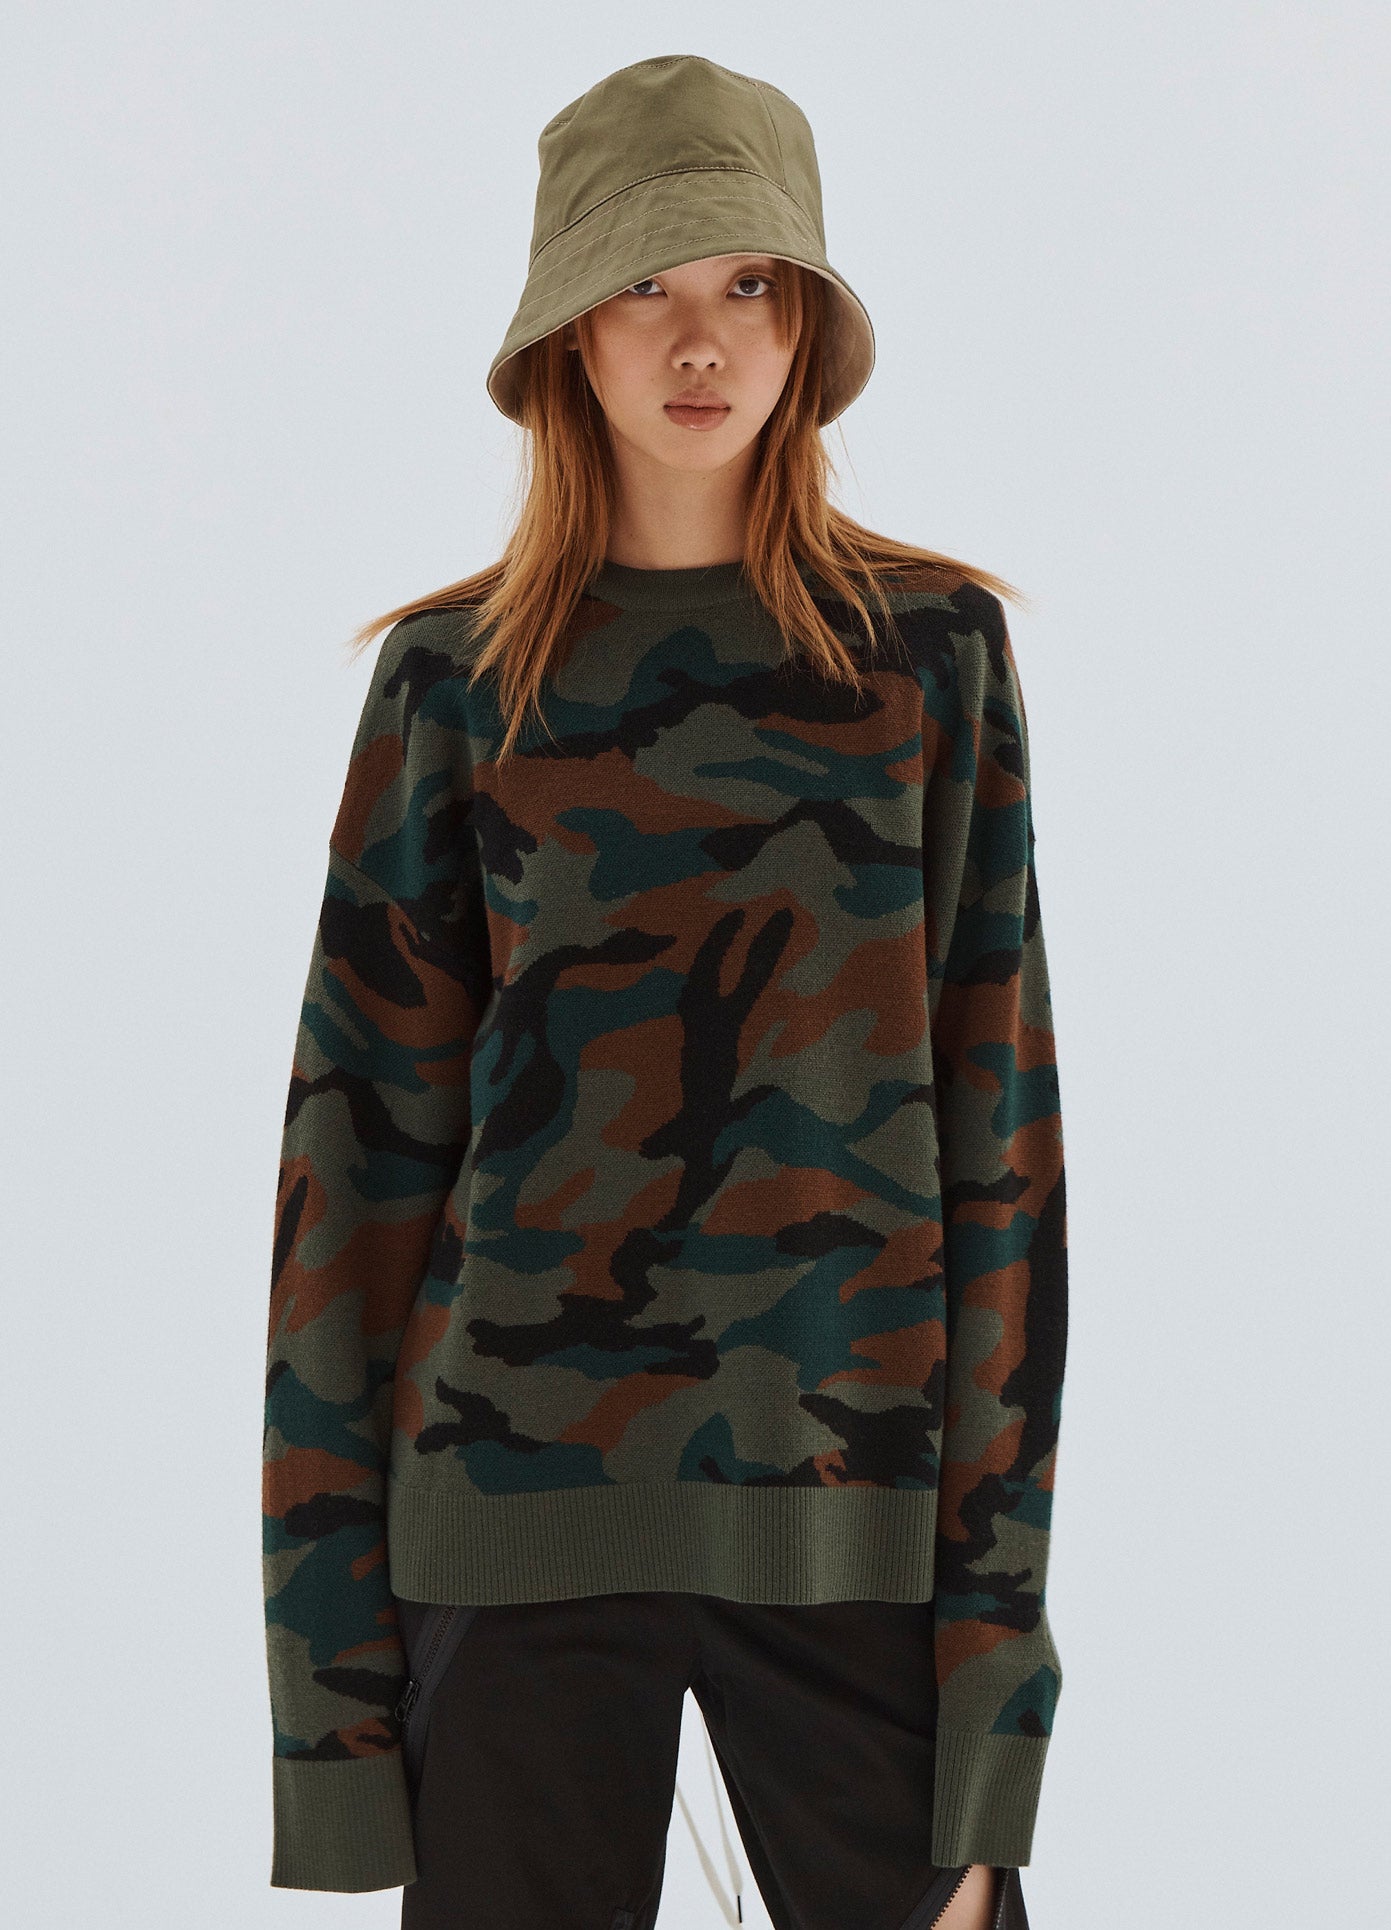 MONSE Boxy Camo Laced Up Sweater on Model Front View